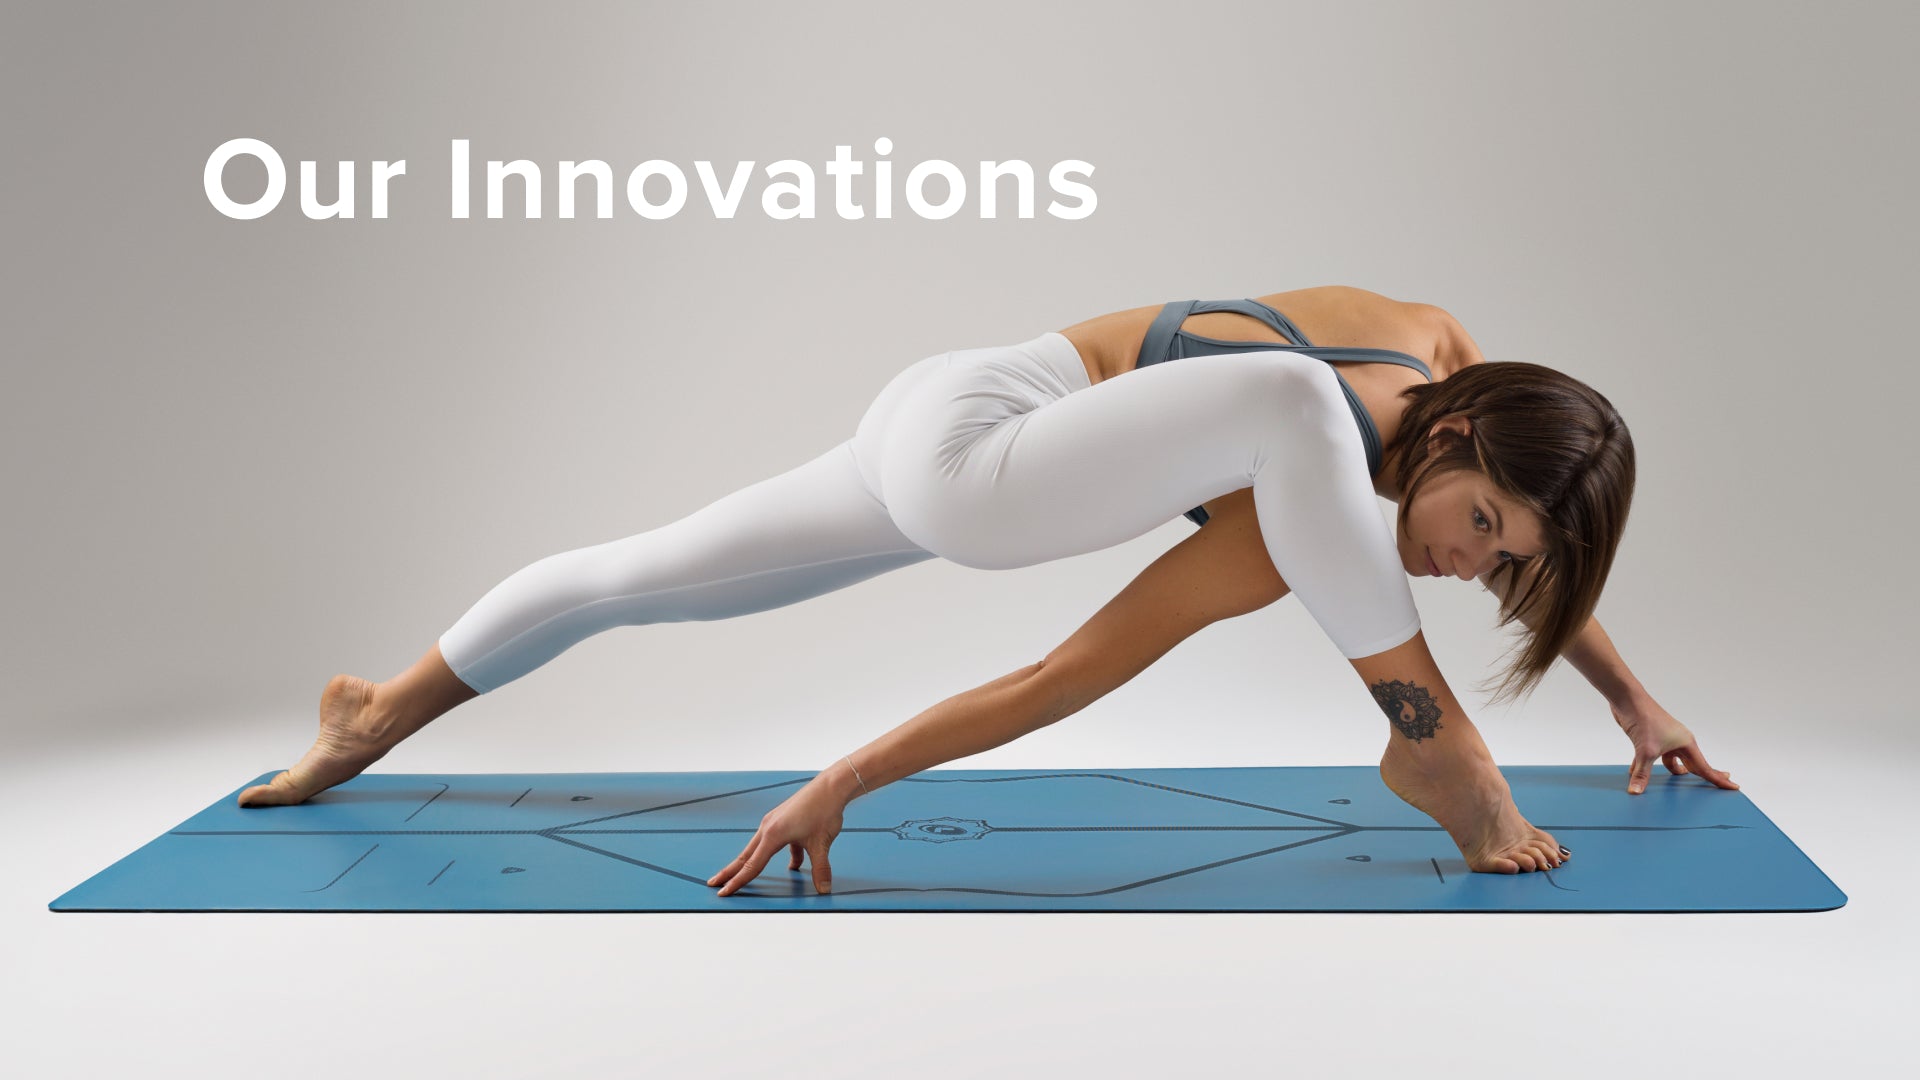 5 Eco-Friendly Yoga Mats Made in Canada